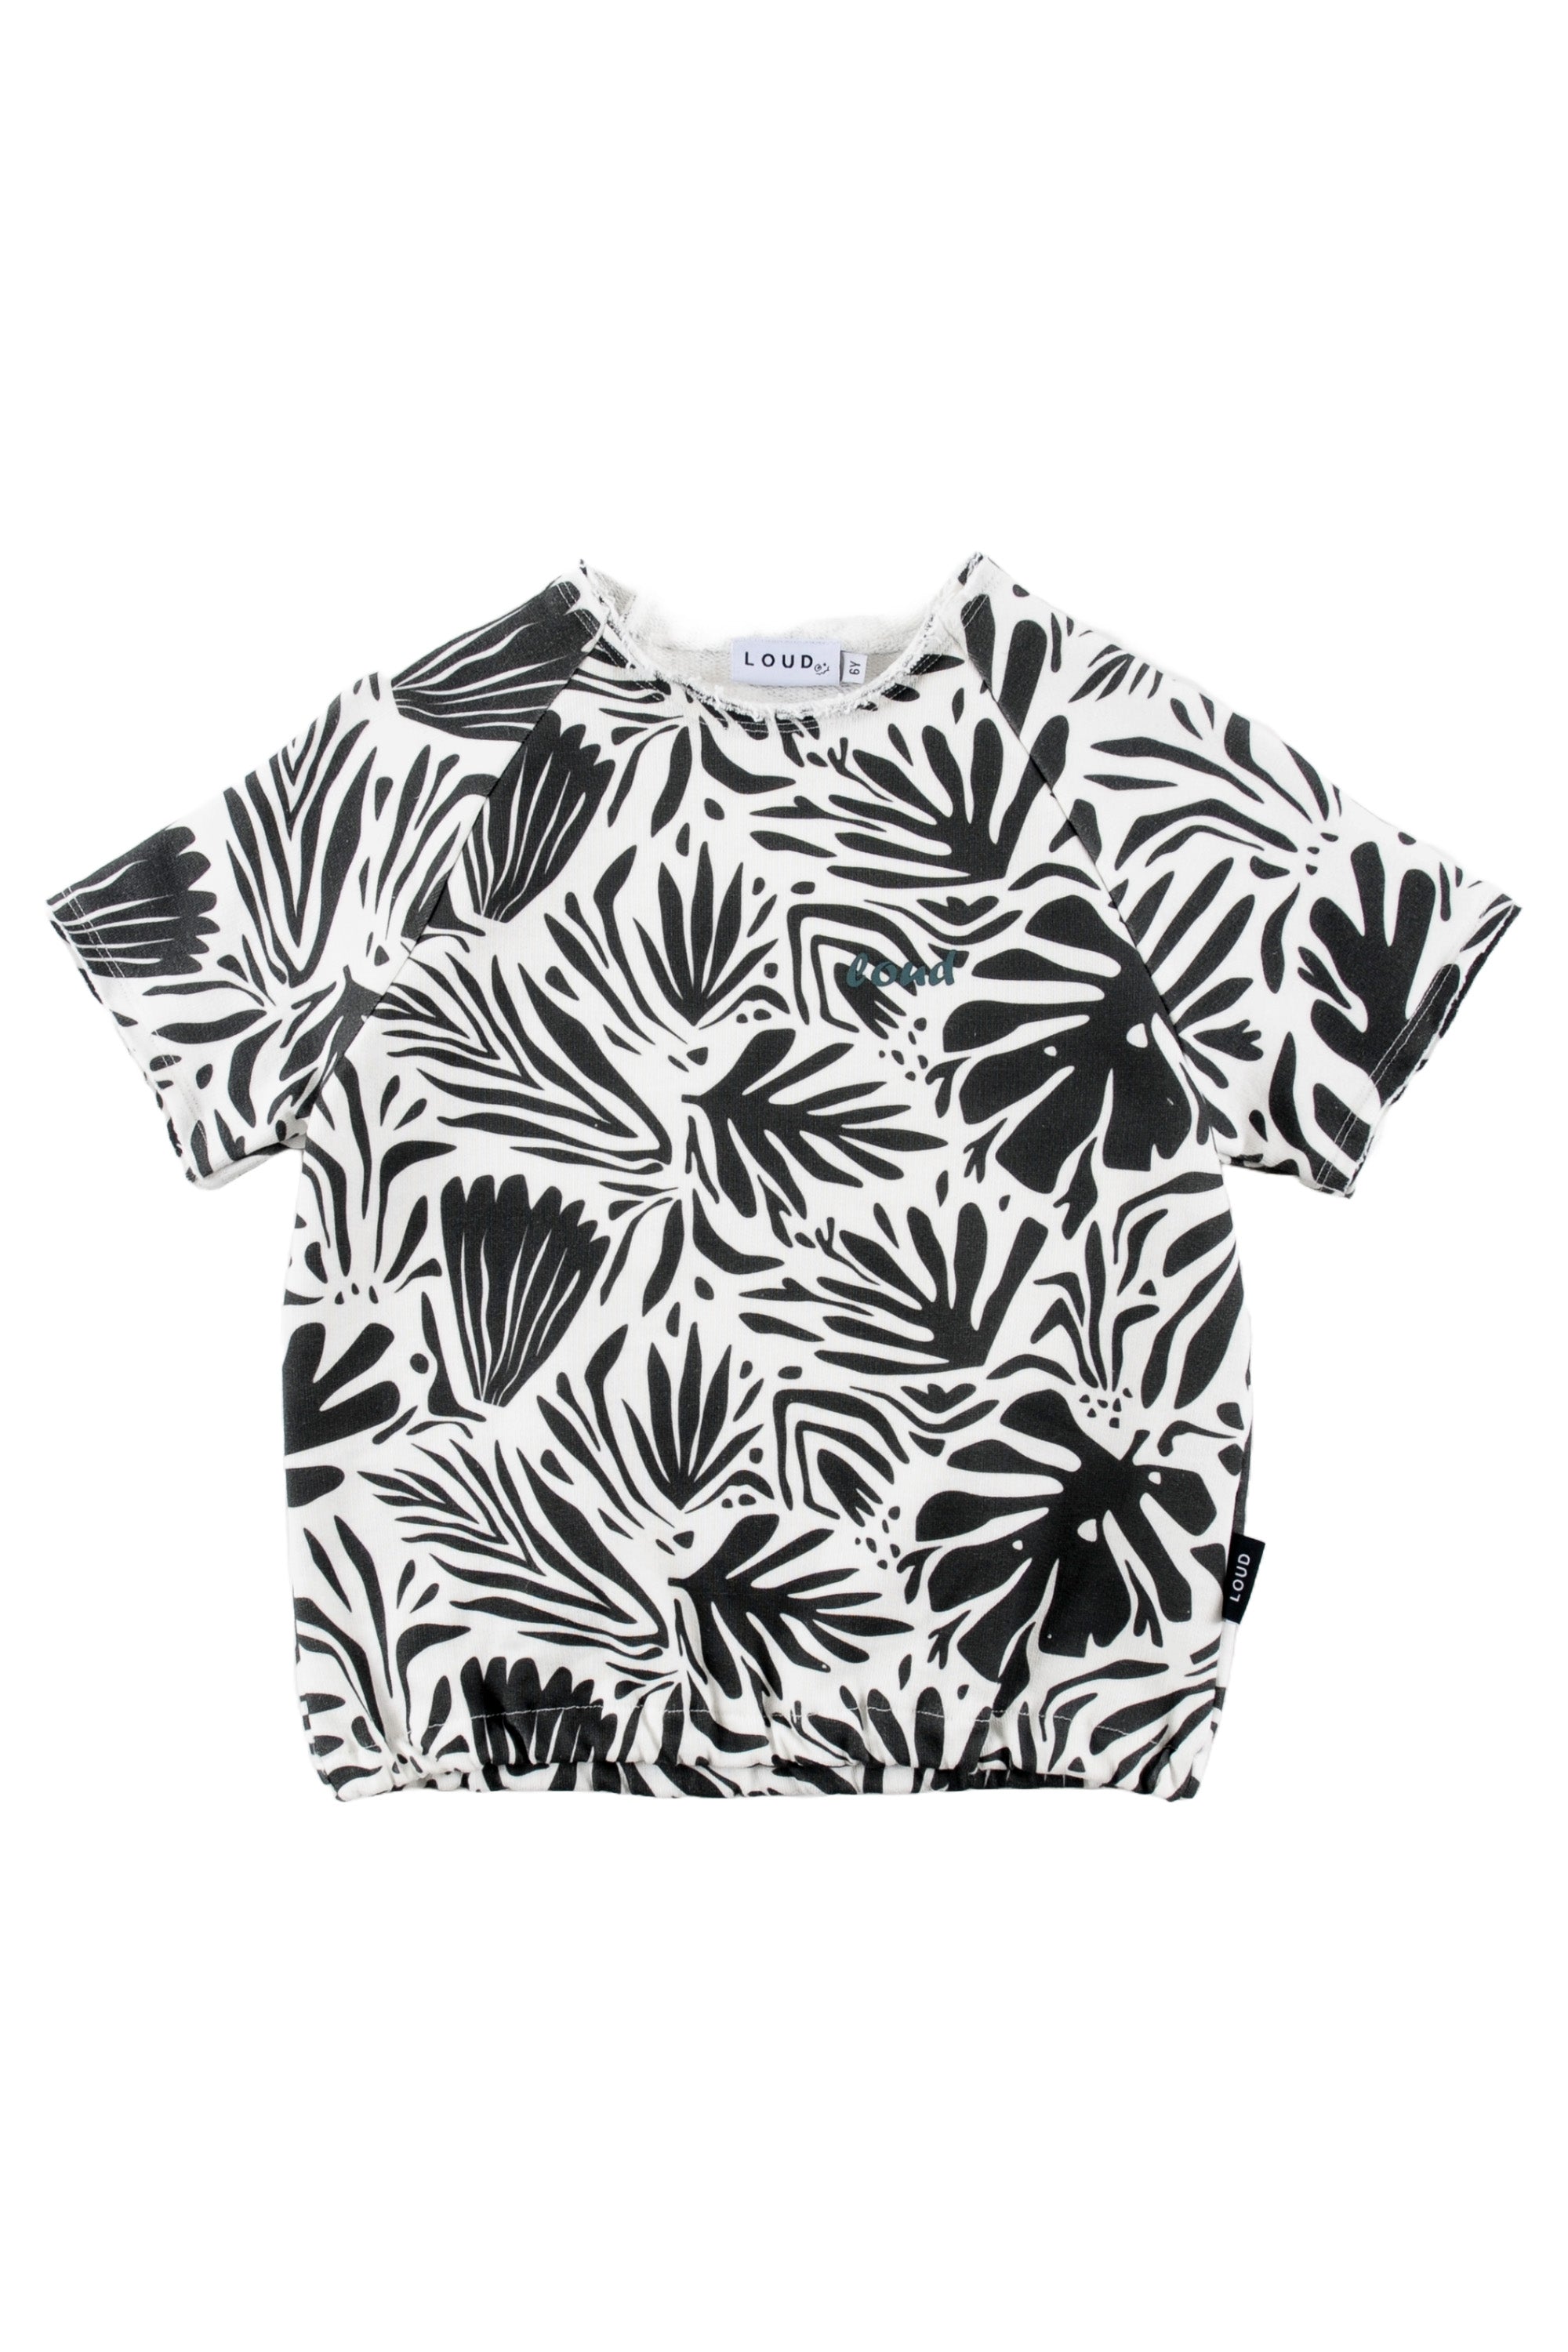 LOUD APPAREL FLORAL ABSTRACT TOP